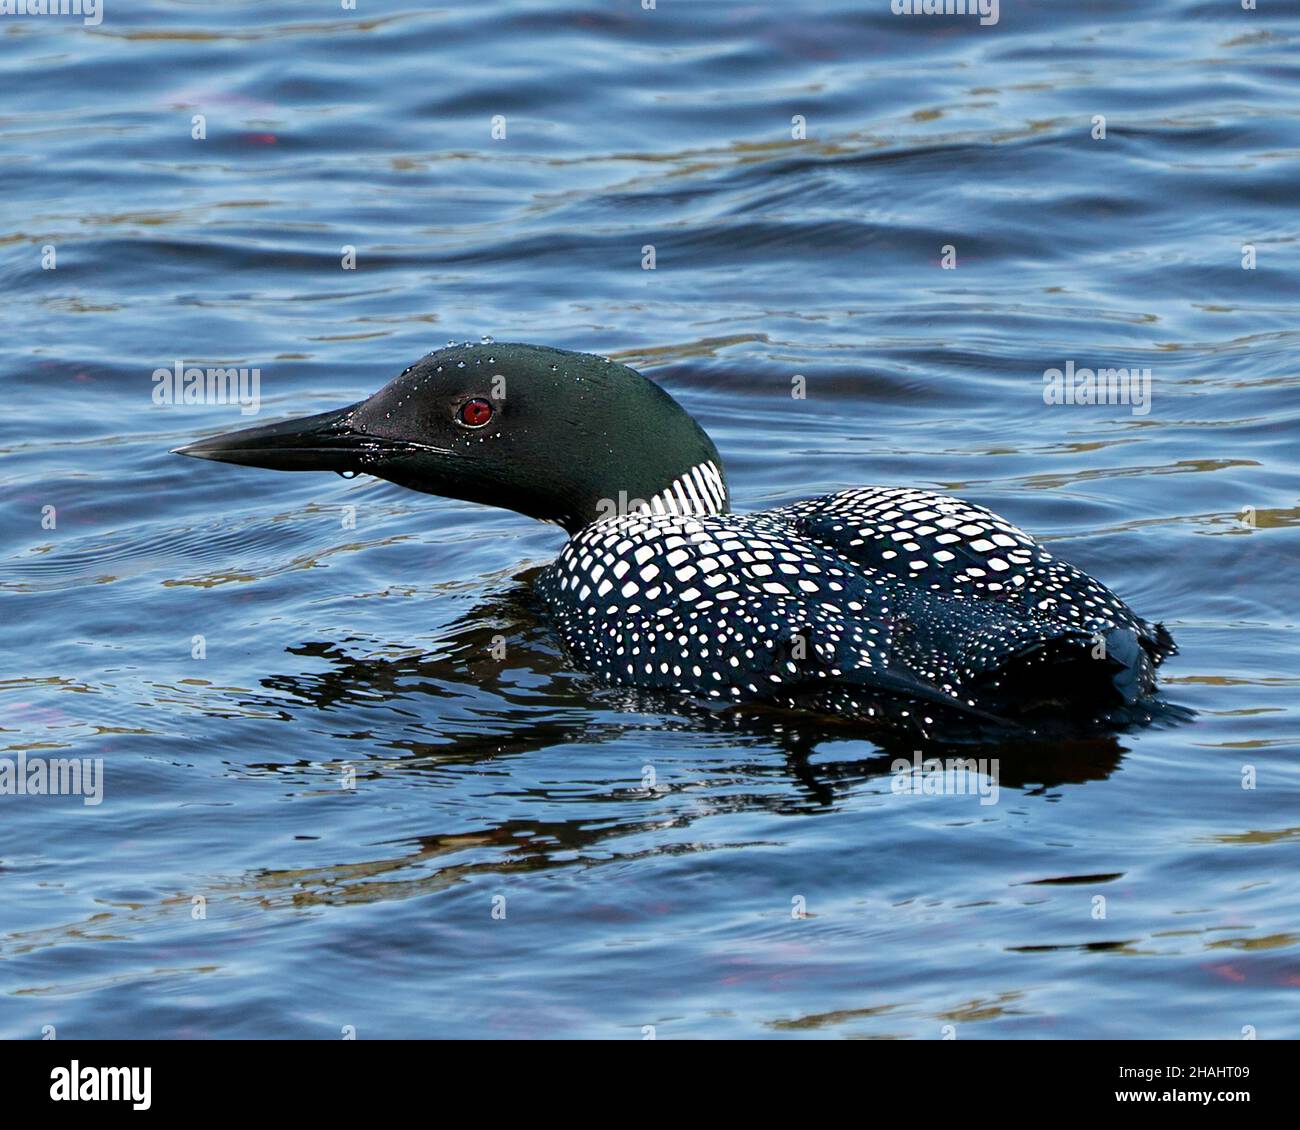 Common Loon close-up profile side rear view swimming in the lake in its environment and habitat, displaying red eye, white and black feather plumage, Stock Photo